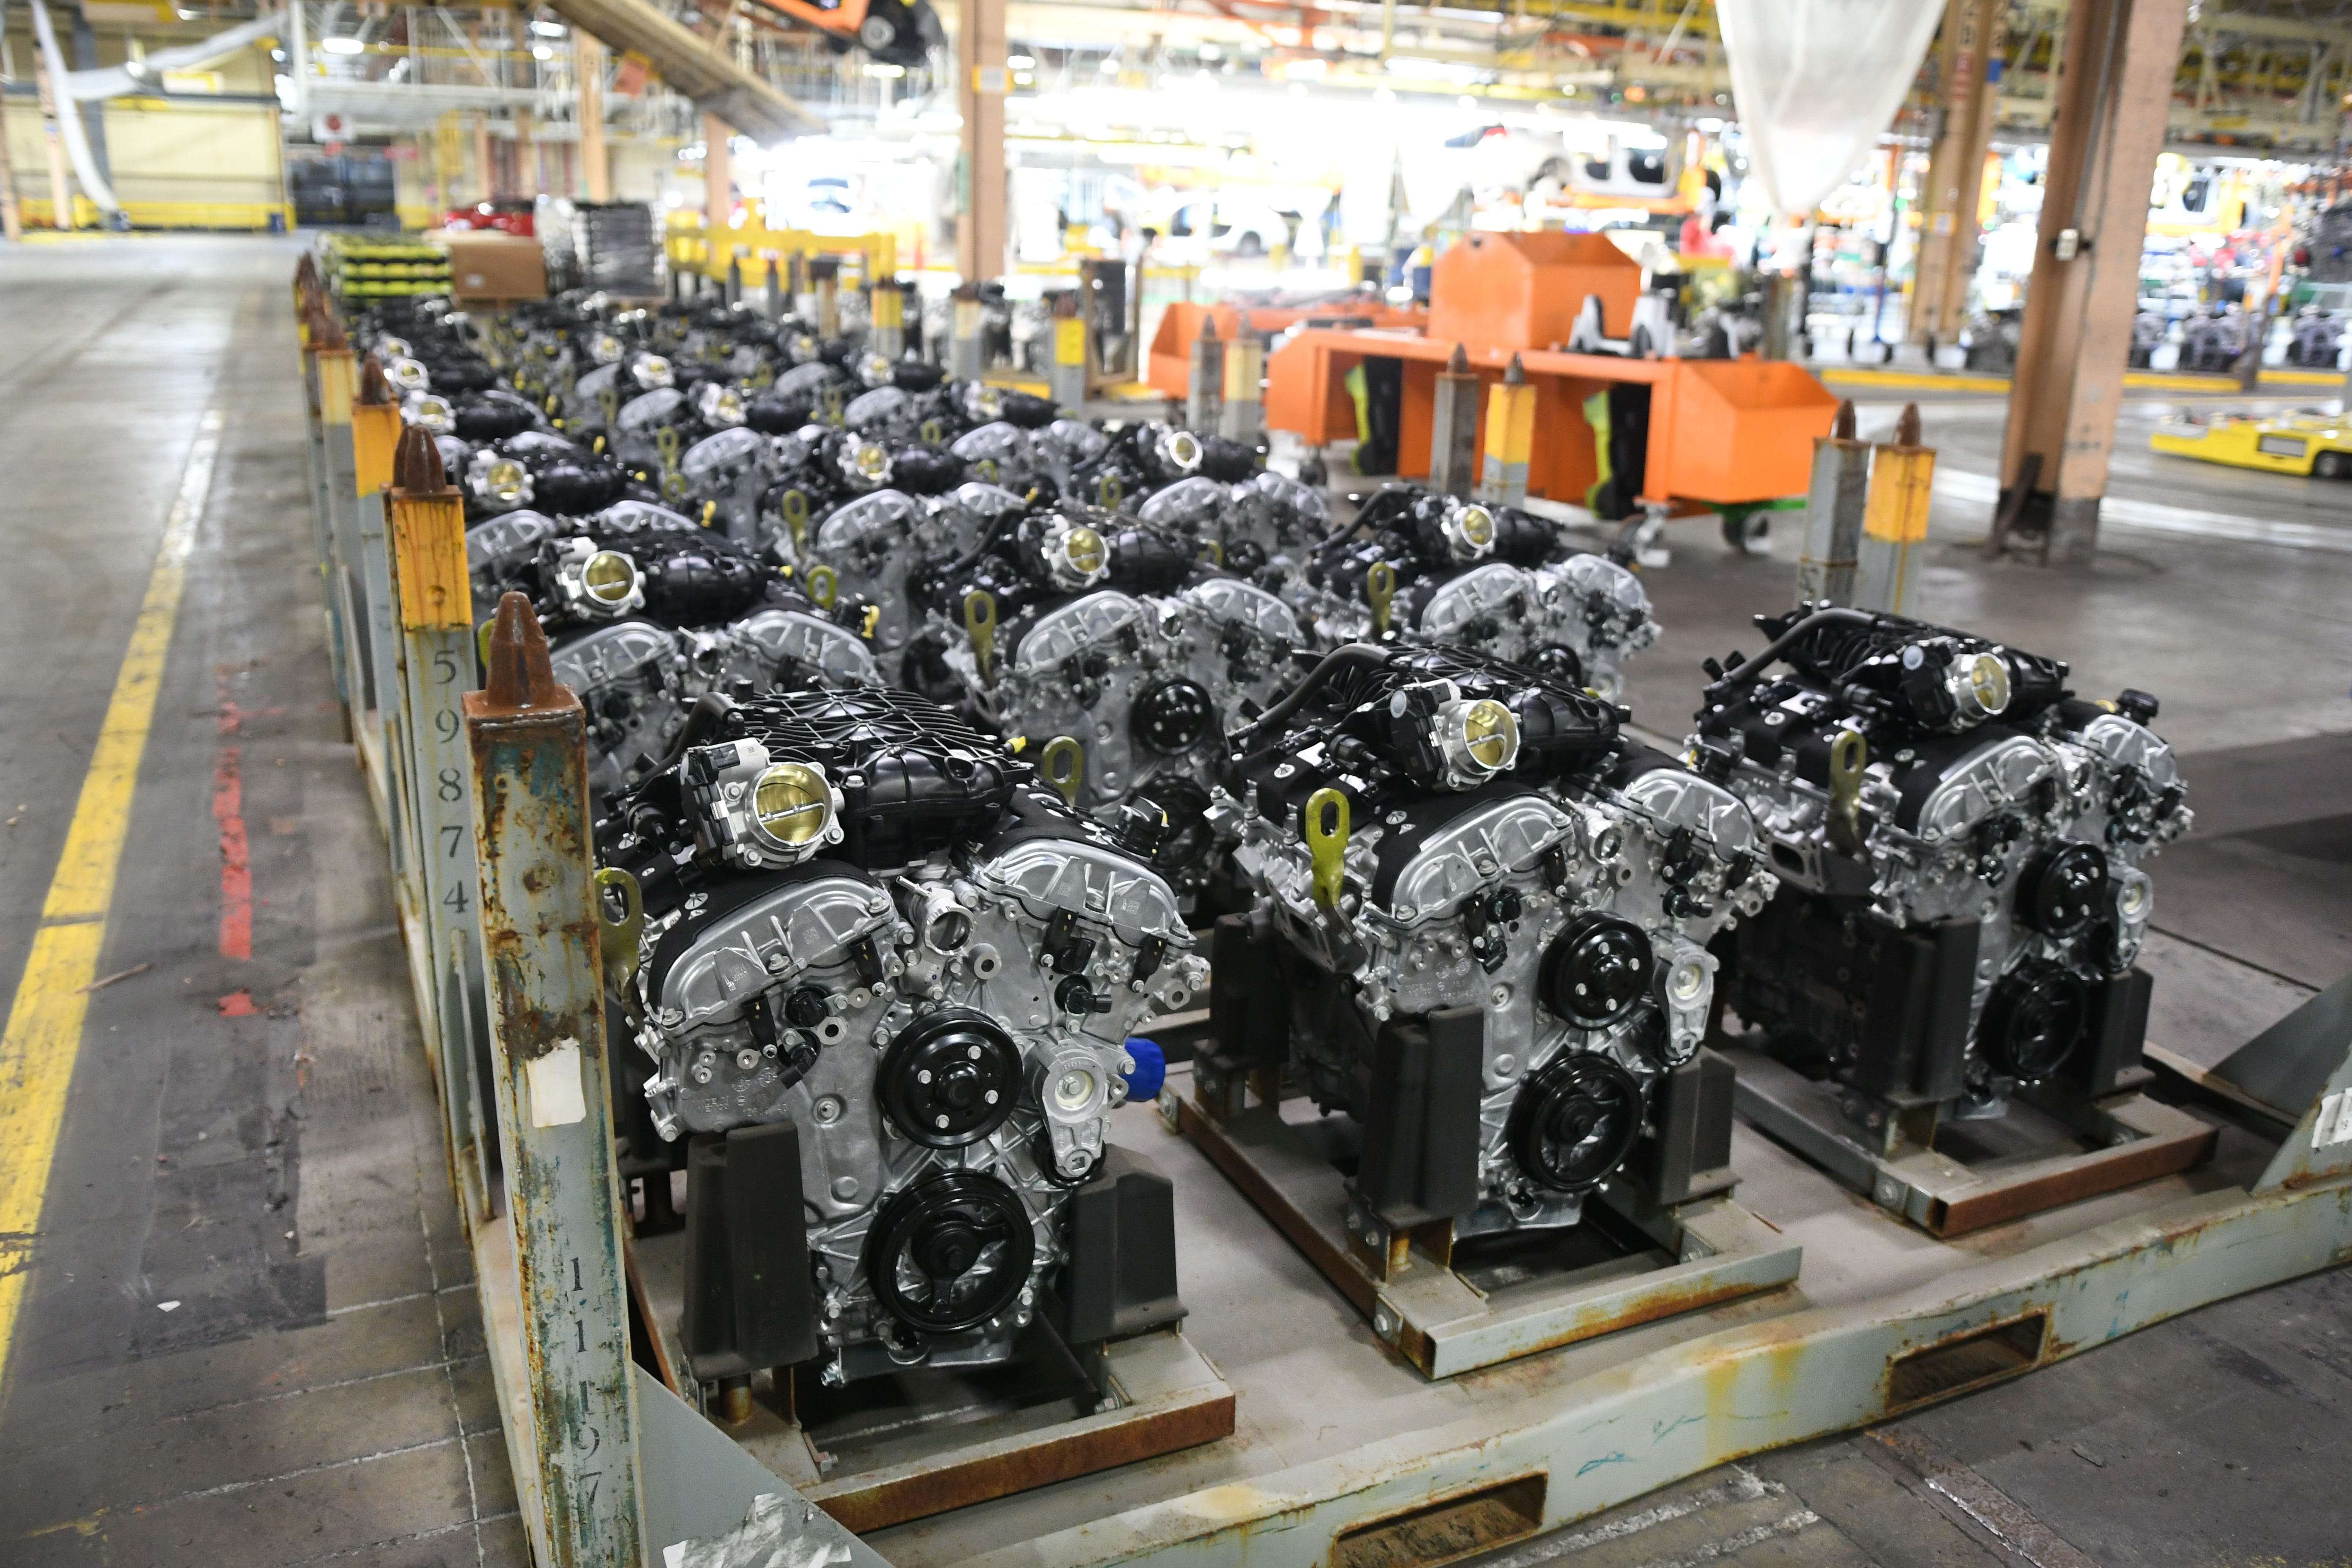 Engines sit at the general assembly area at General Motors Detroit-Hamtramck plant where the Chevrolet Impala is built.